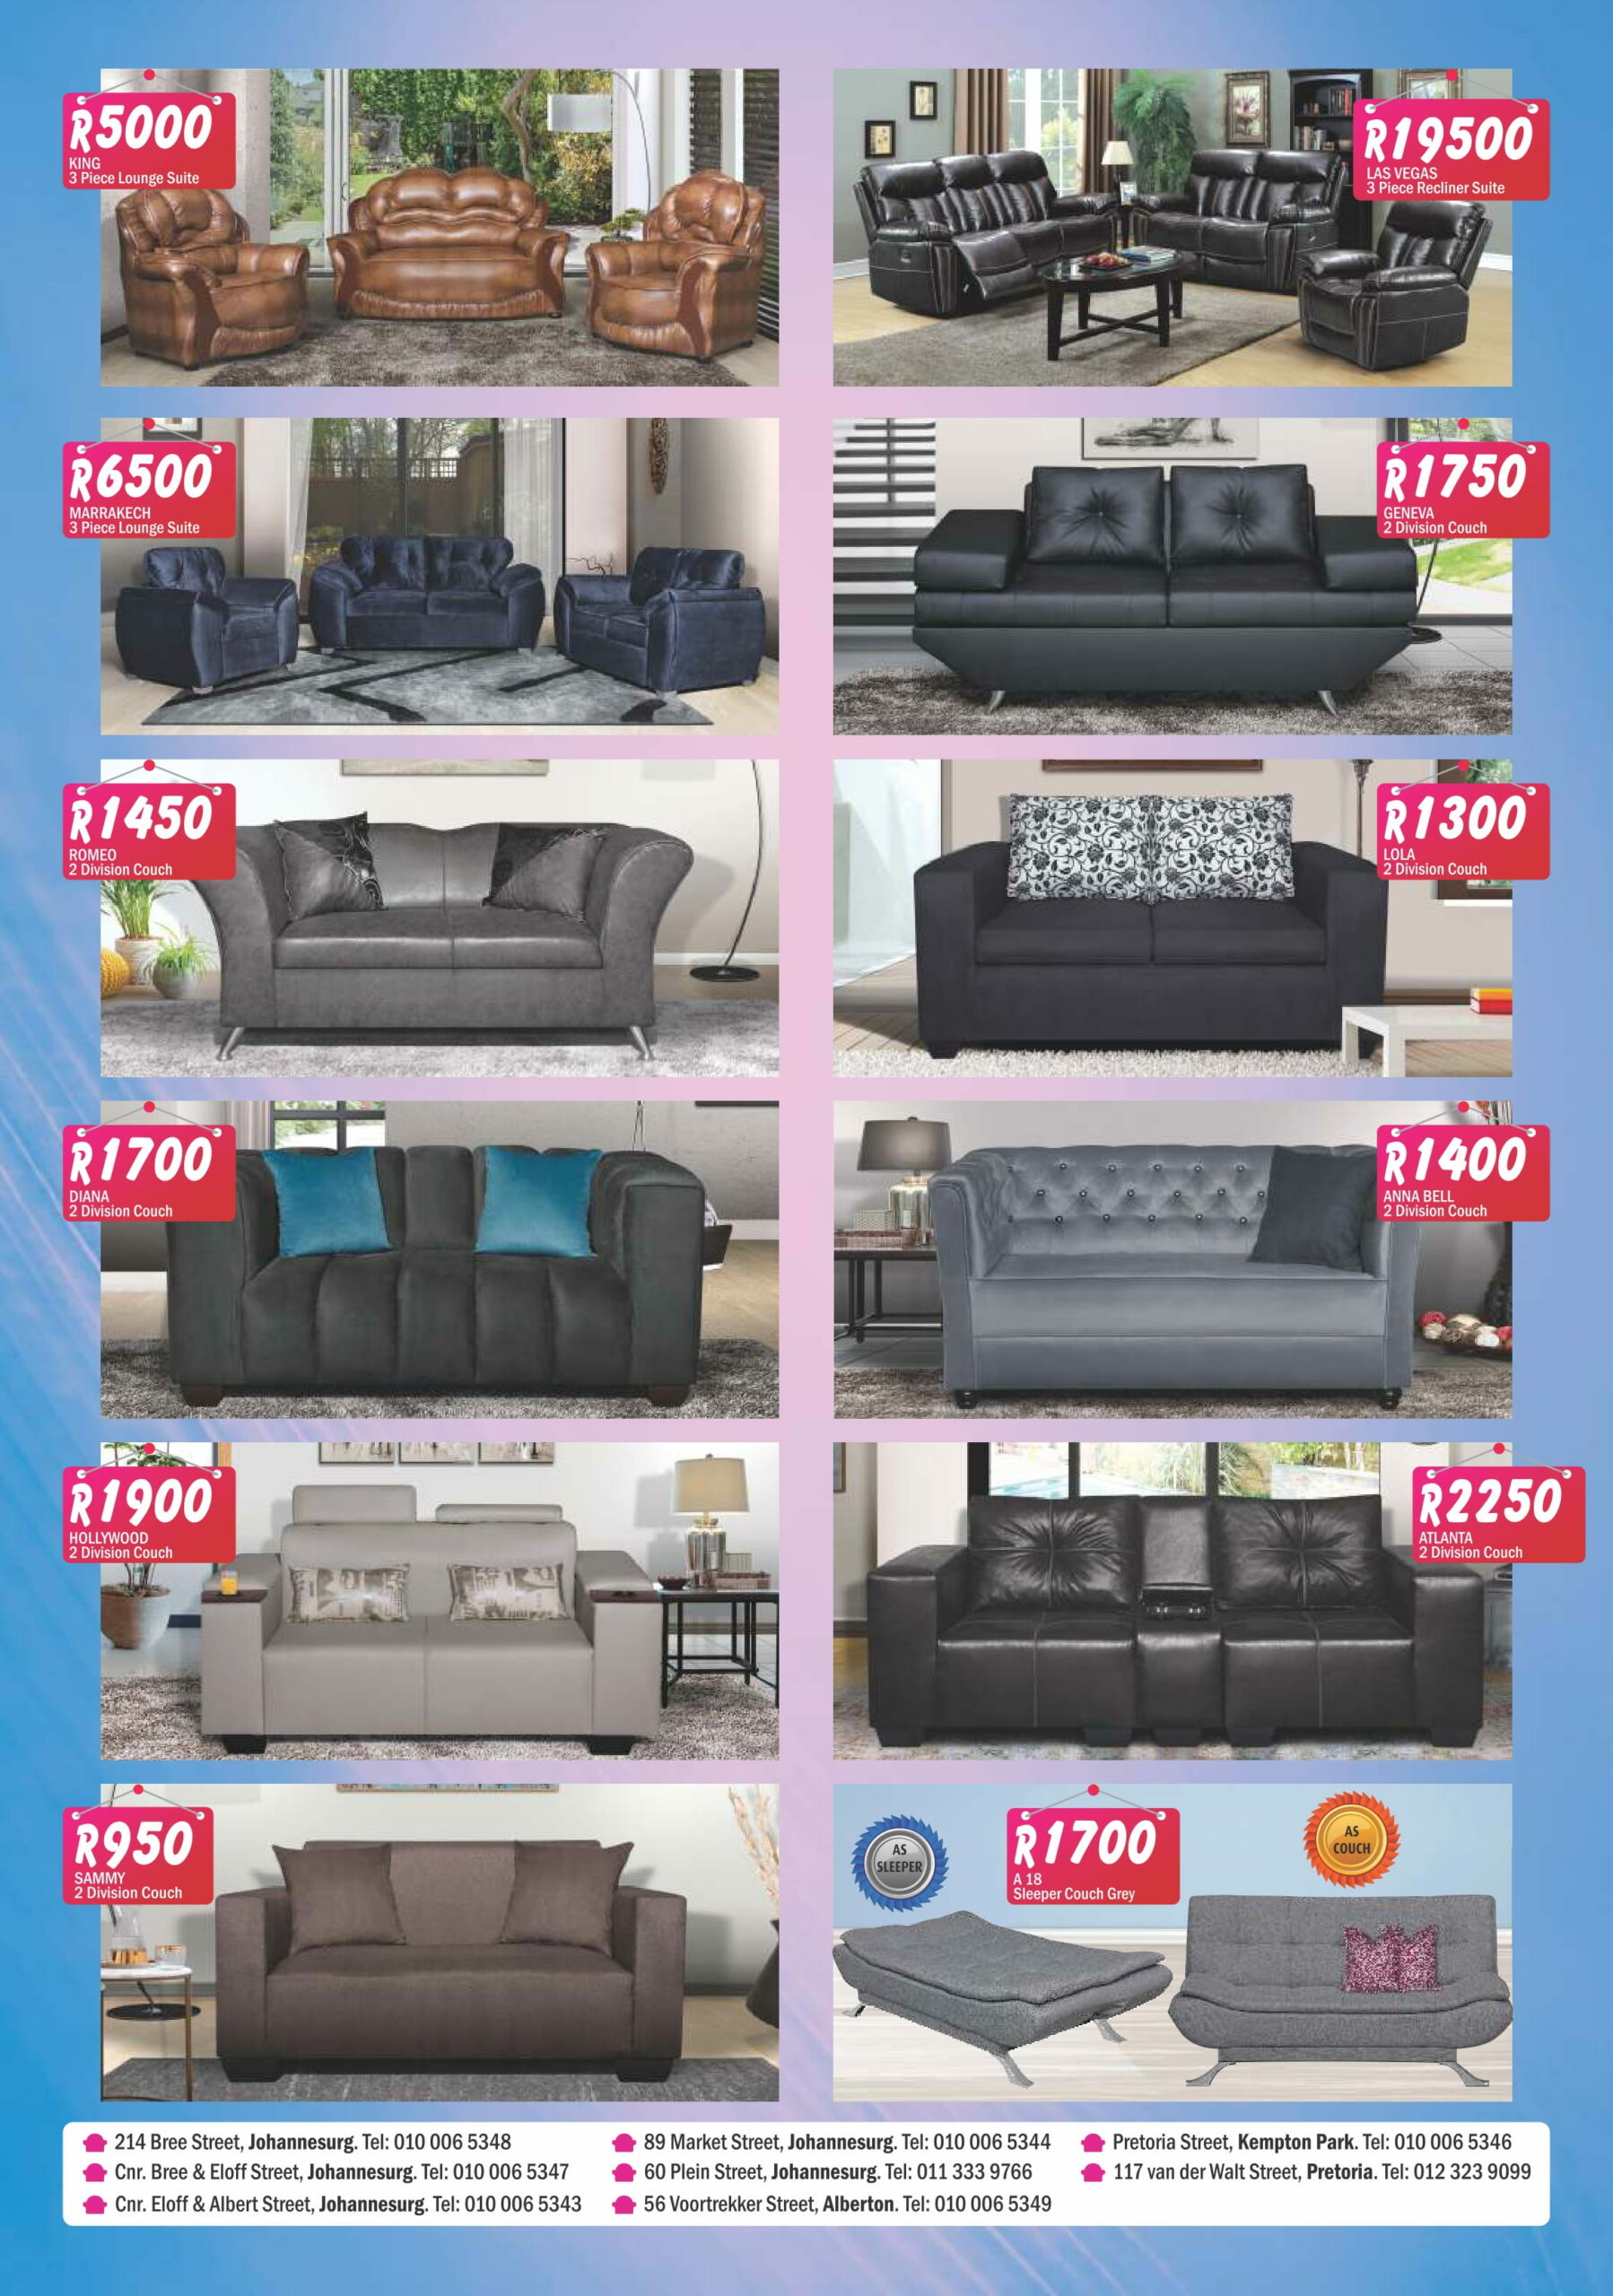 Akhona Furniture Catalogue And Prices South Africa Insider